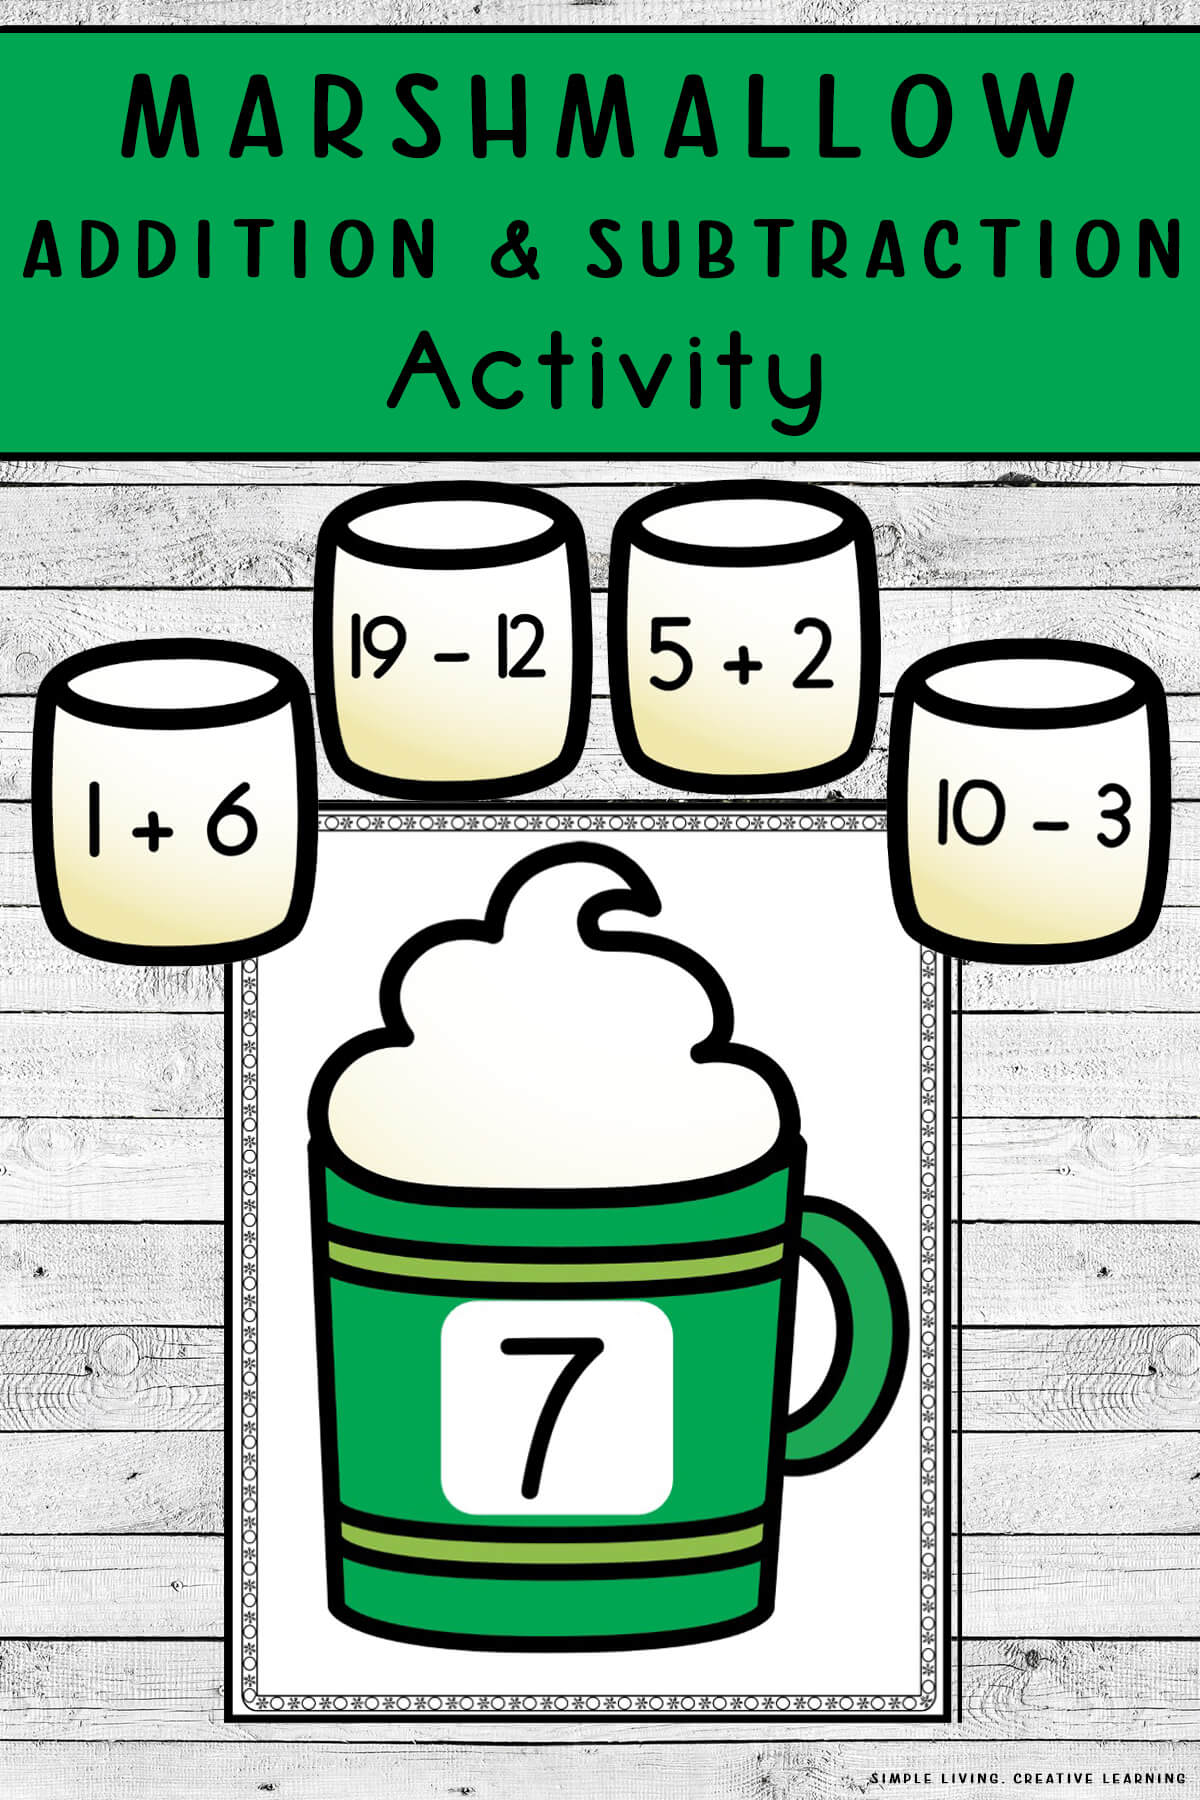 Marshmallow Addition and Subtraction Activity